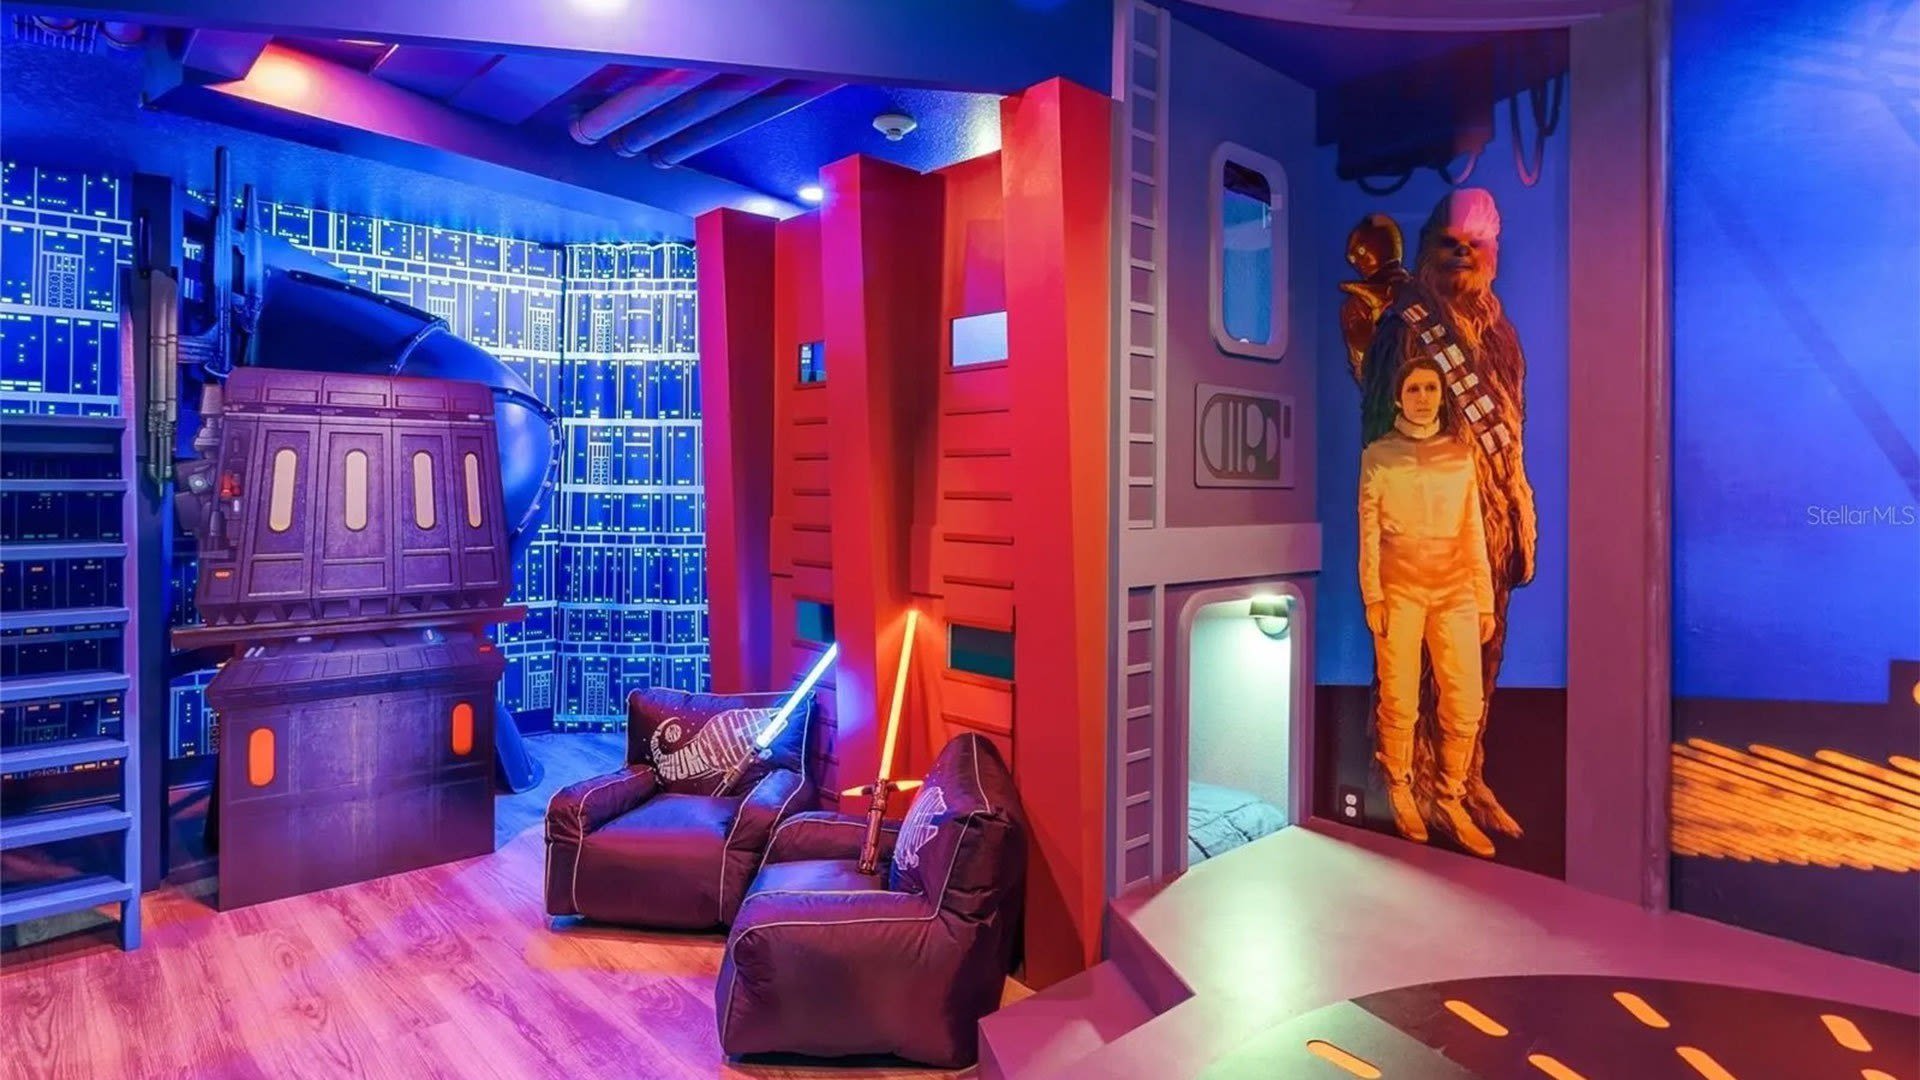 May These 4 'Star Wars'-Themed Homes Be With You